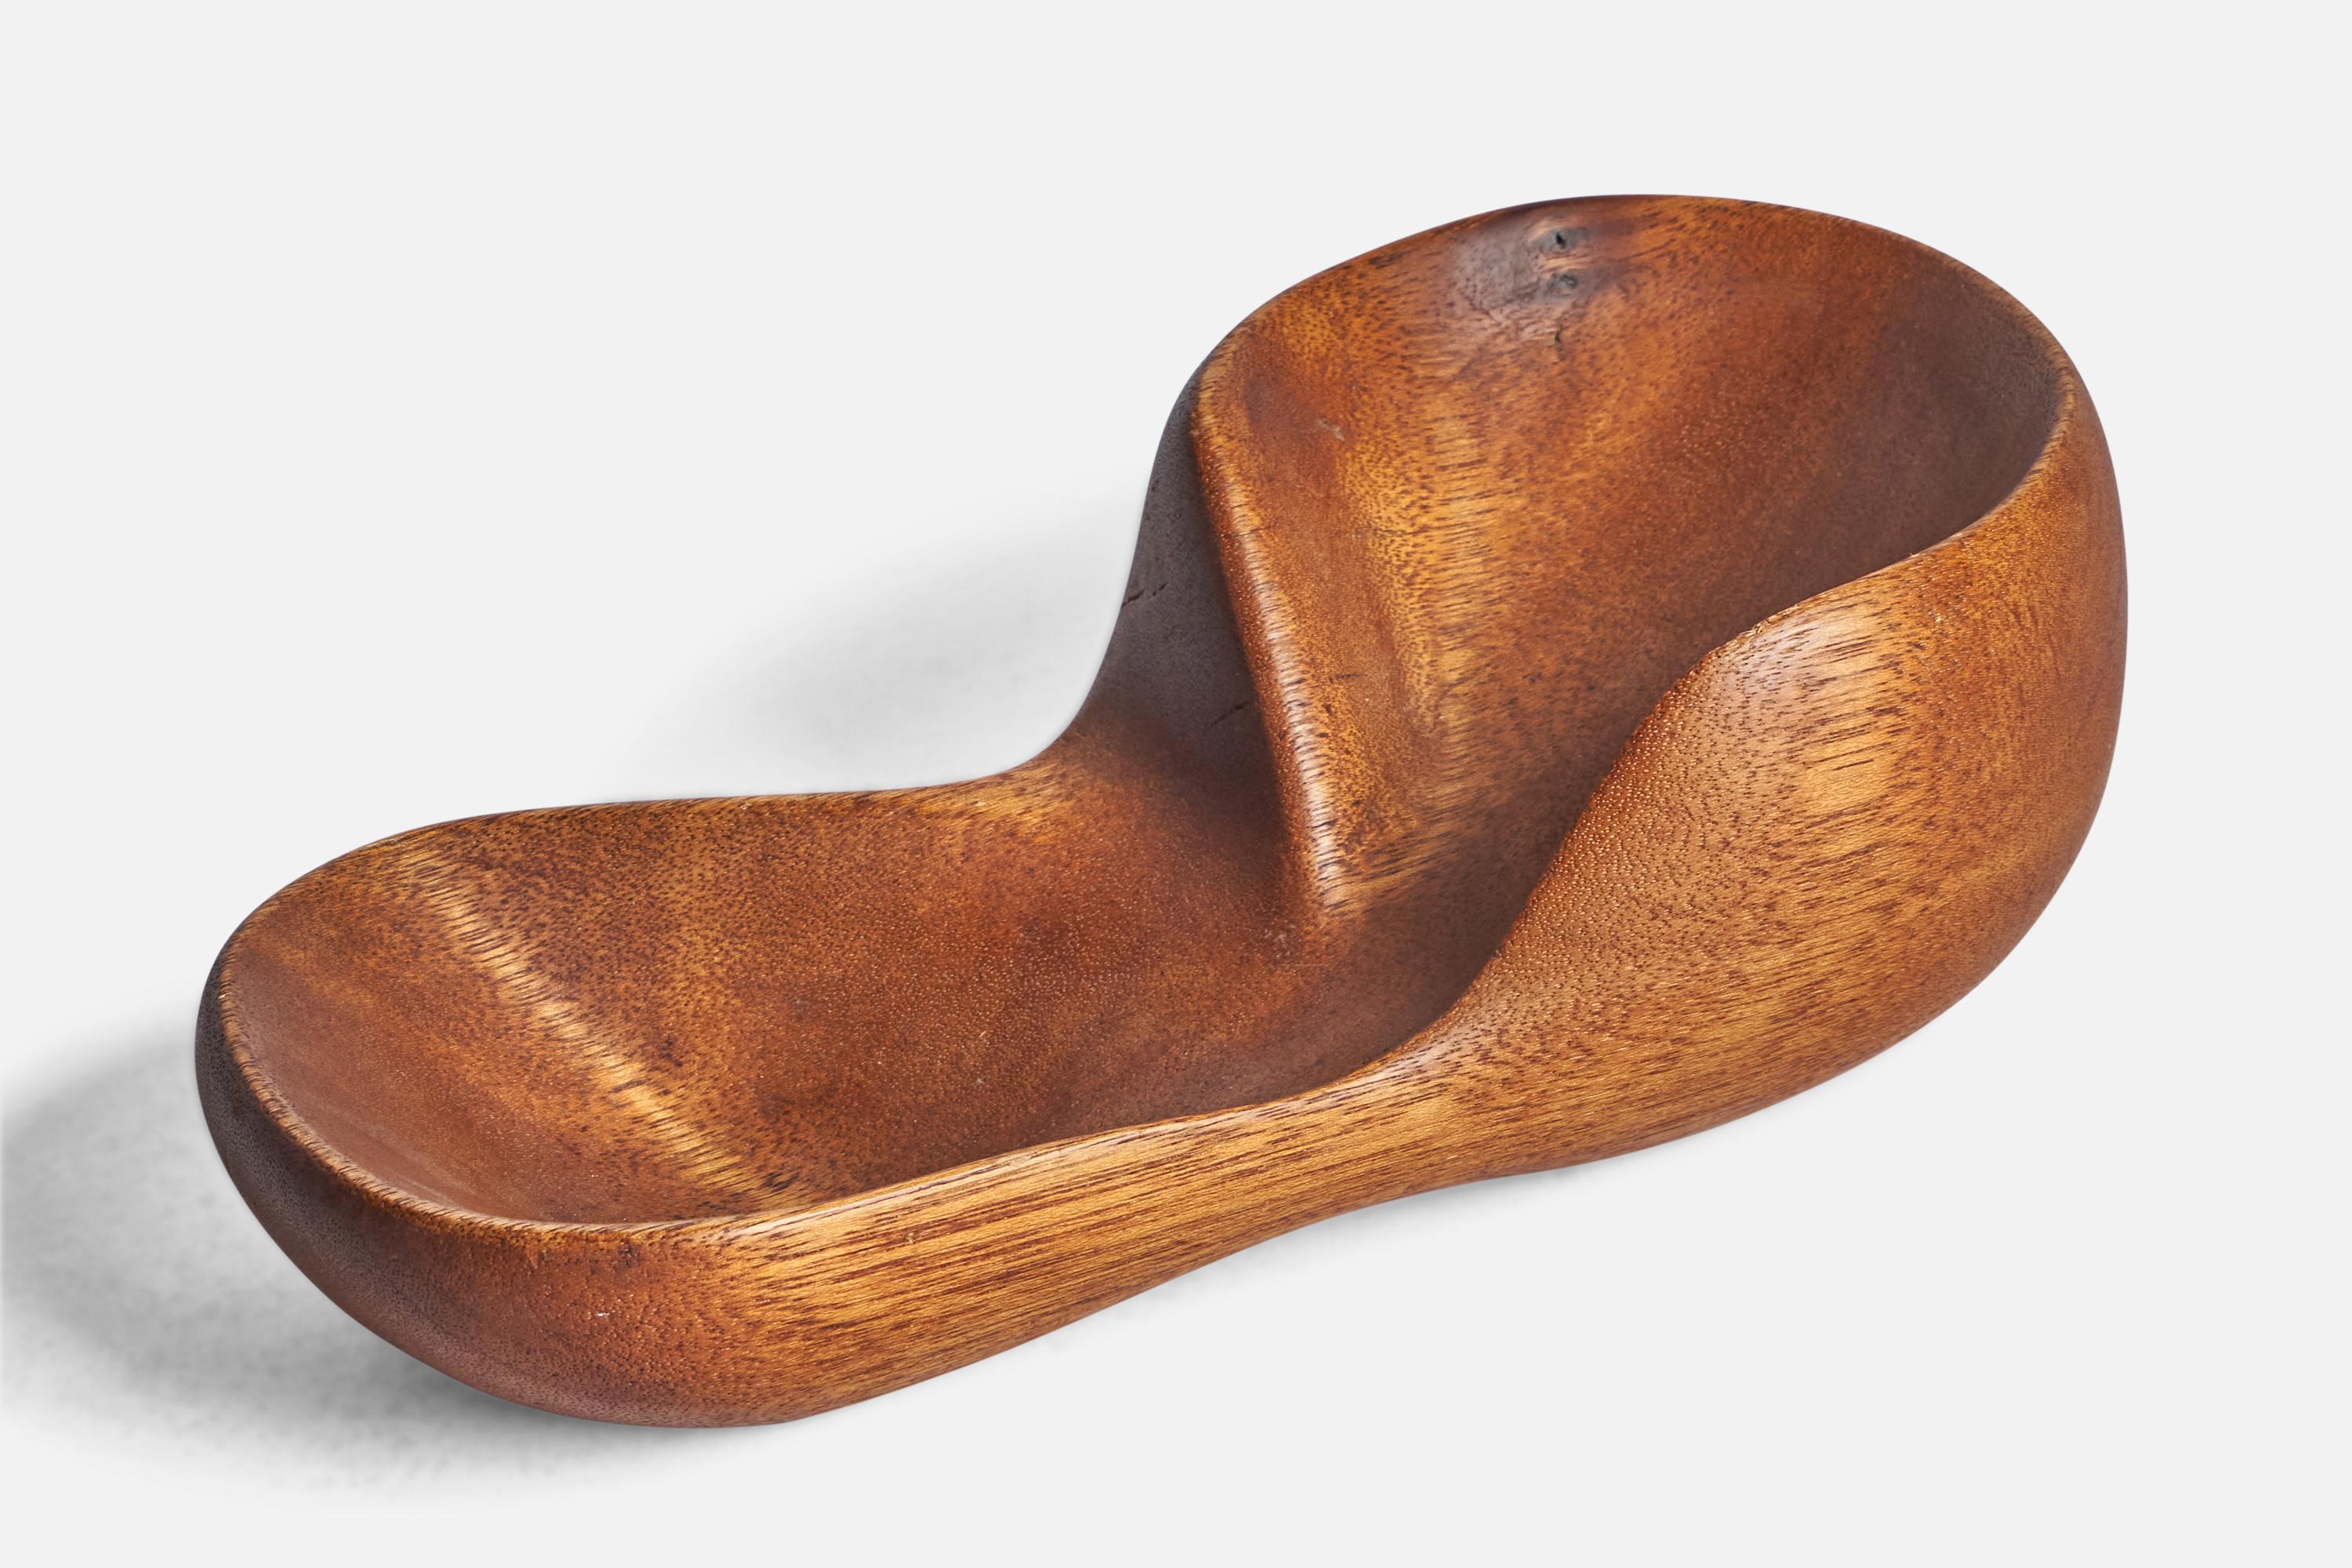 A freeform teak bowl or dish designed and produced in the US, c. 1950s.